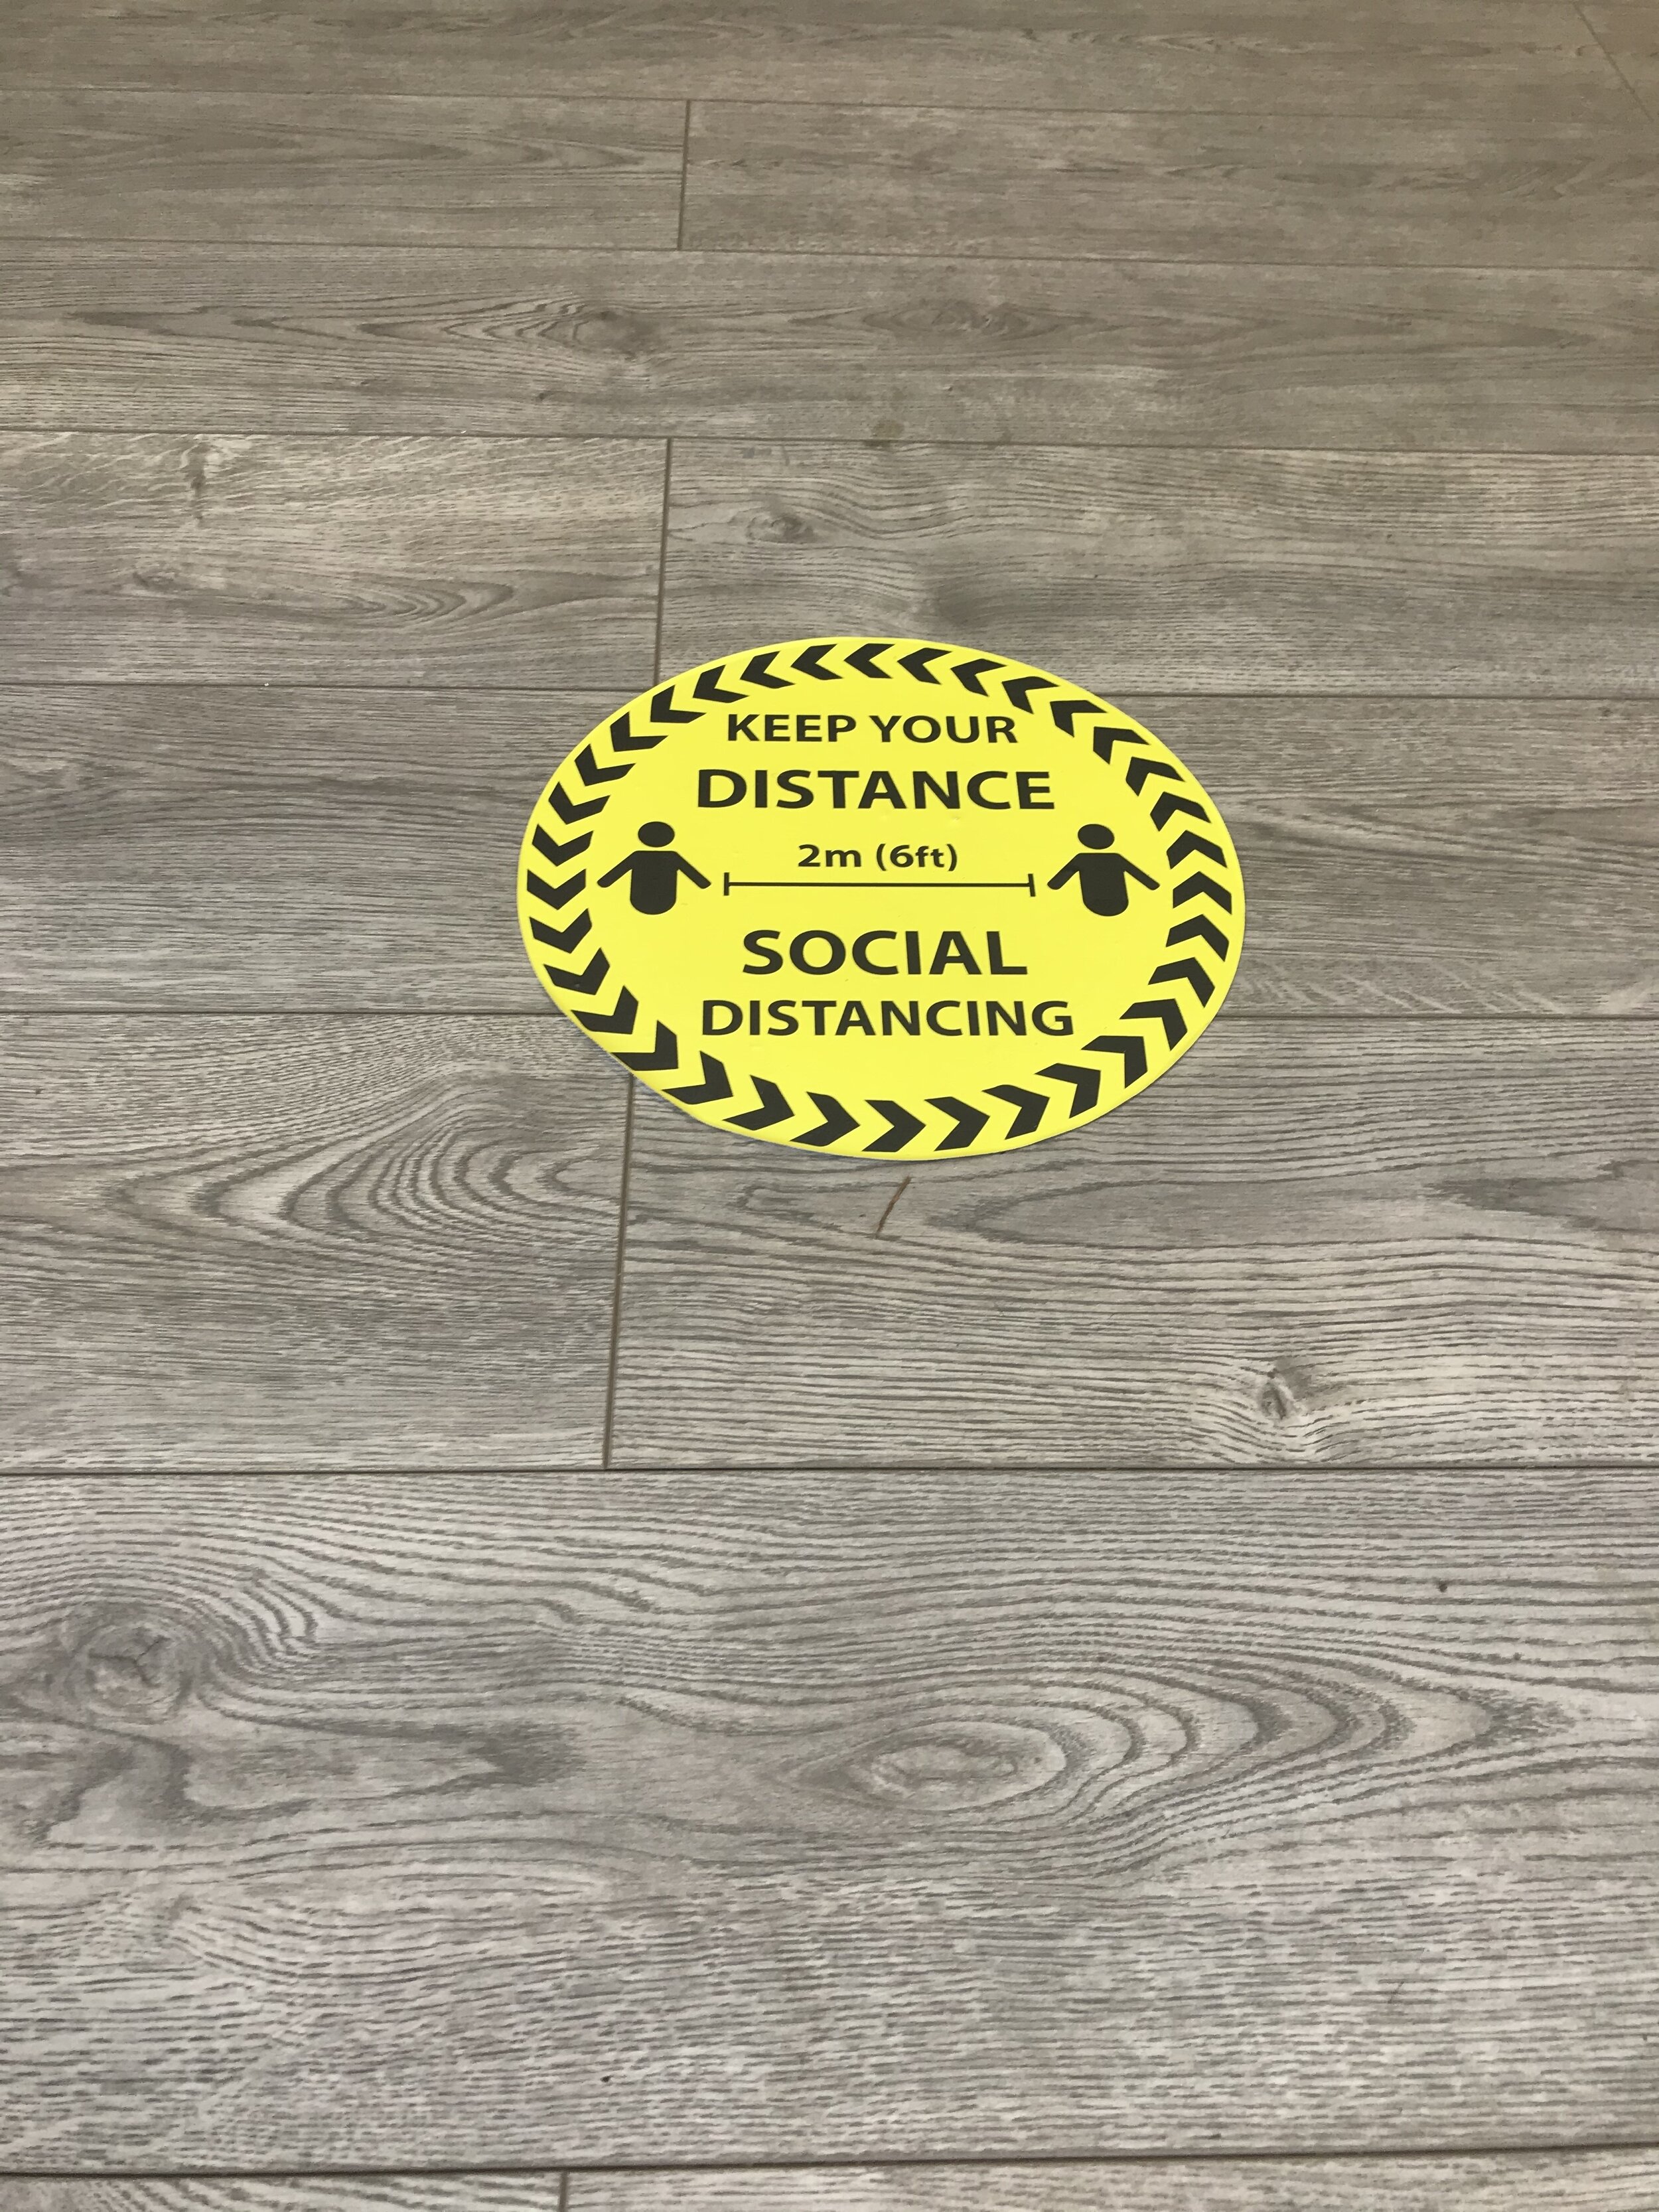 10X Social Distancing Floor Decals Self Adhesive Stickers Sign Keep Distance 2M 